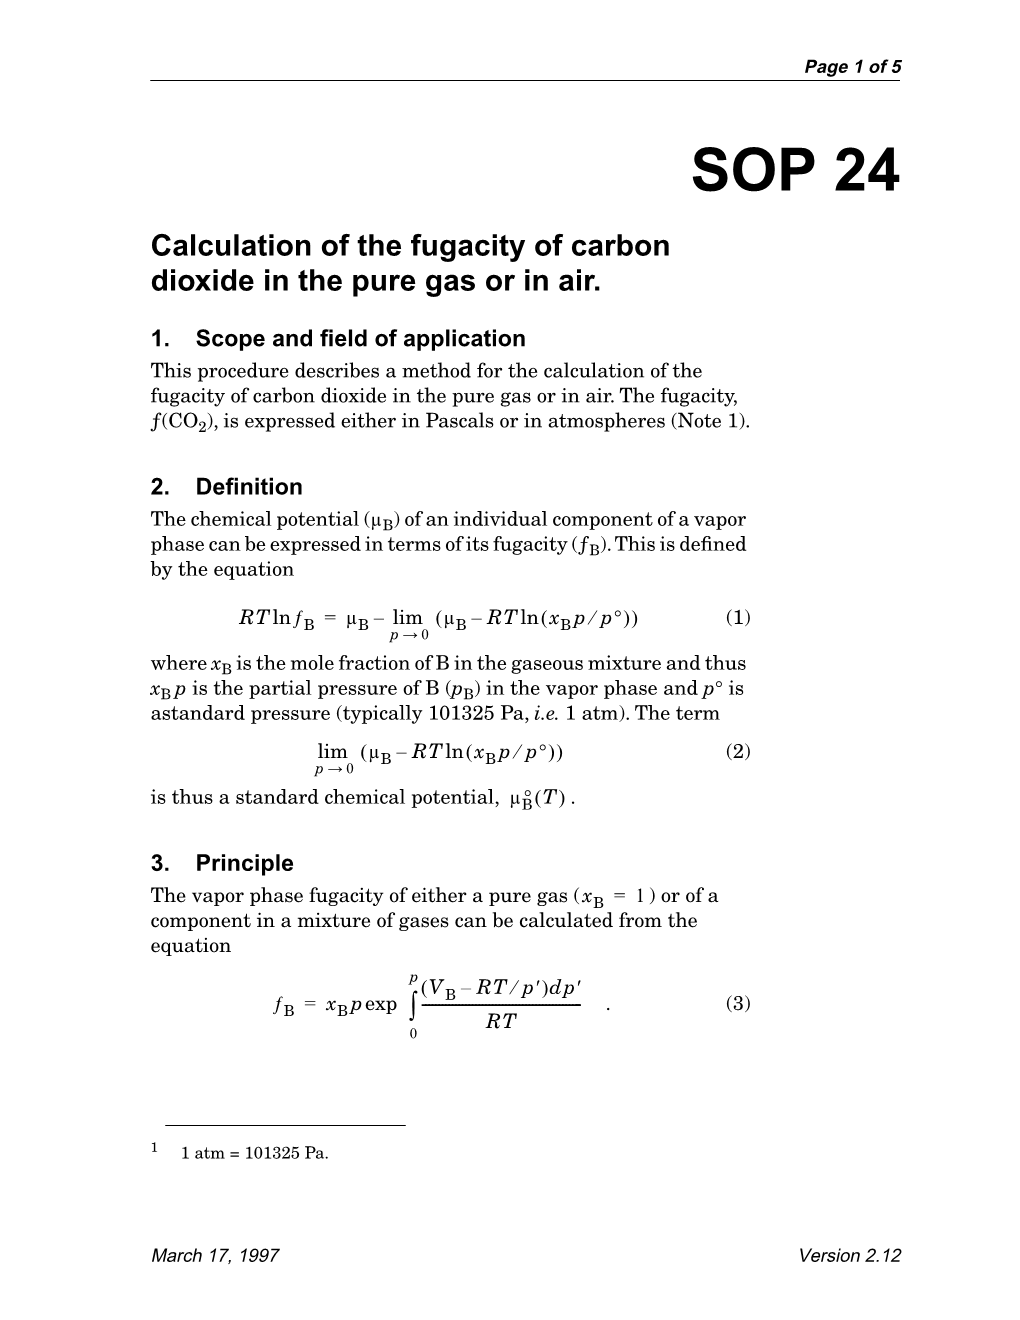 SOP 24 Calculation of the Fugacity of Carbon Dioxide in the Pure Gas Or in Air